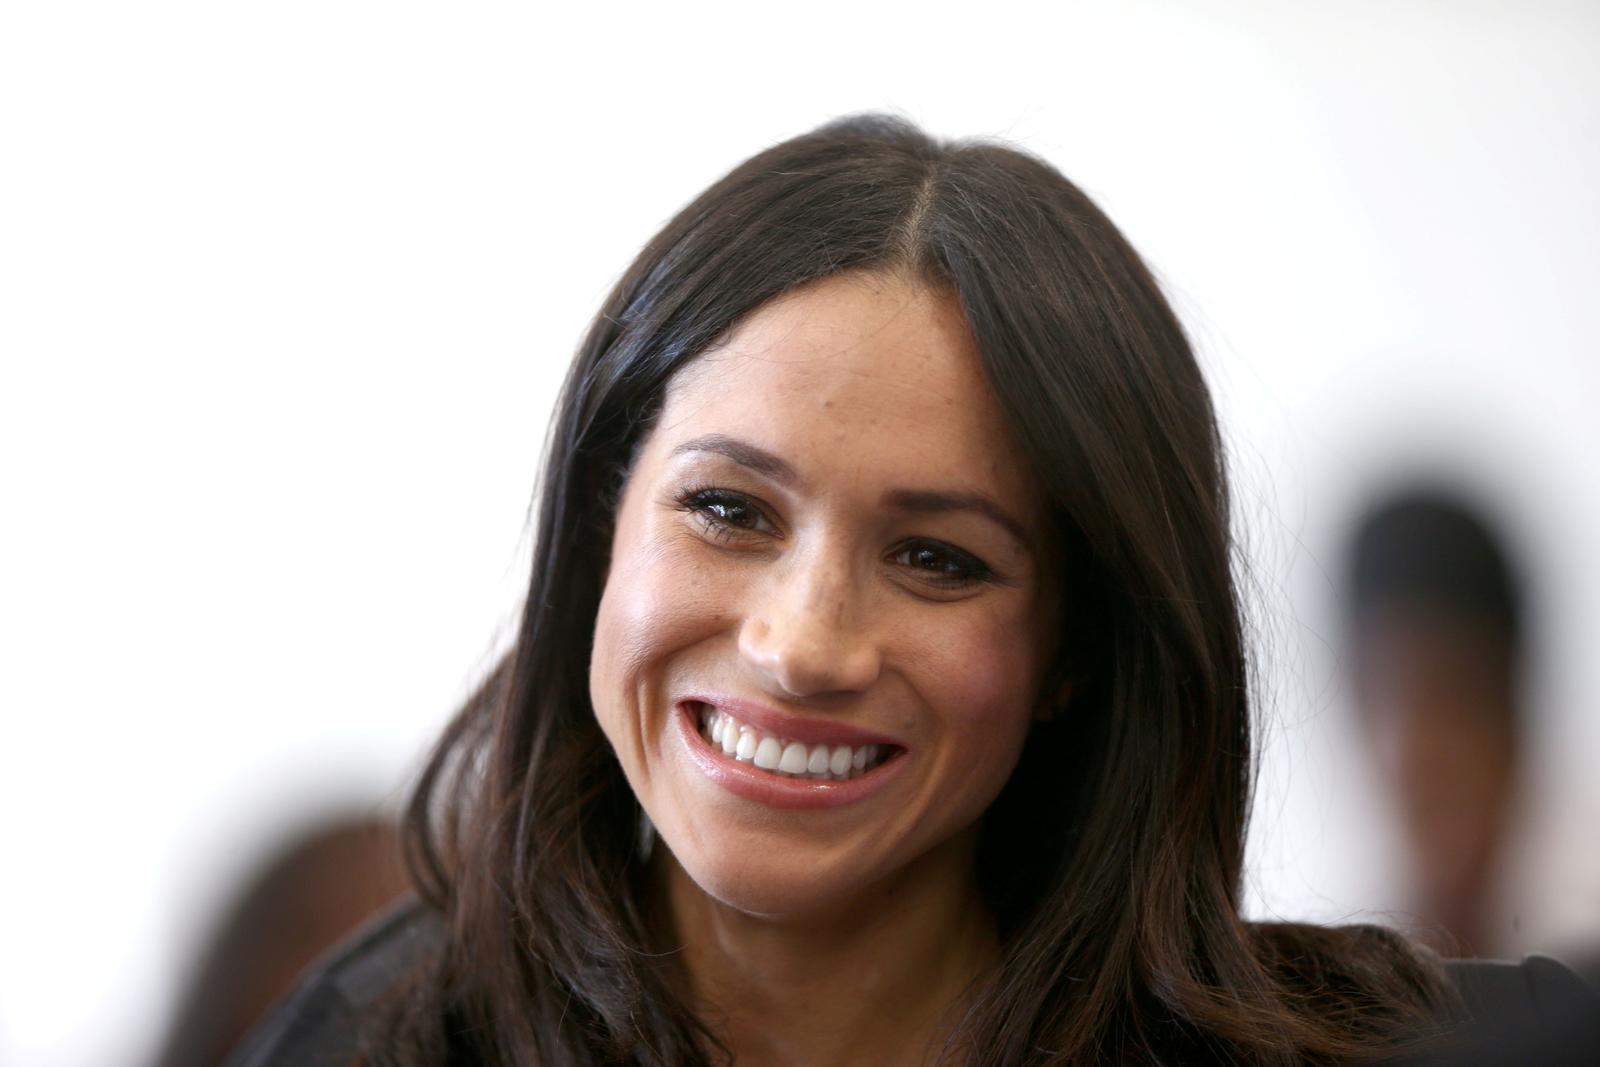 Britain’s Prince Harry’s fiancee Meghan Markle attends a reception with delegates from the Commonwealth Youth Forum at the Queen Elizabeth II Conference Centre, London